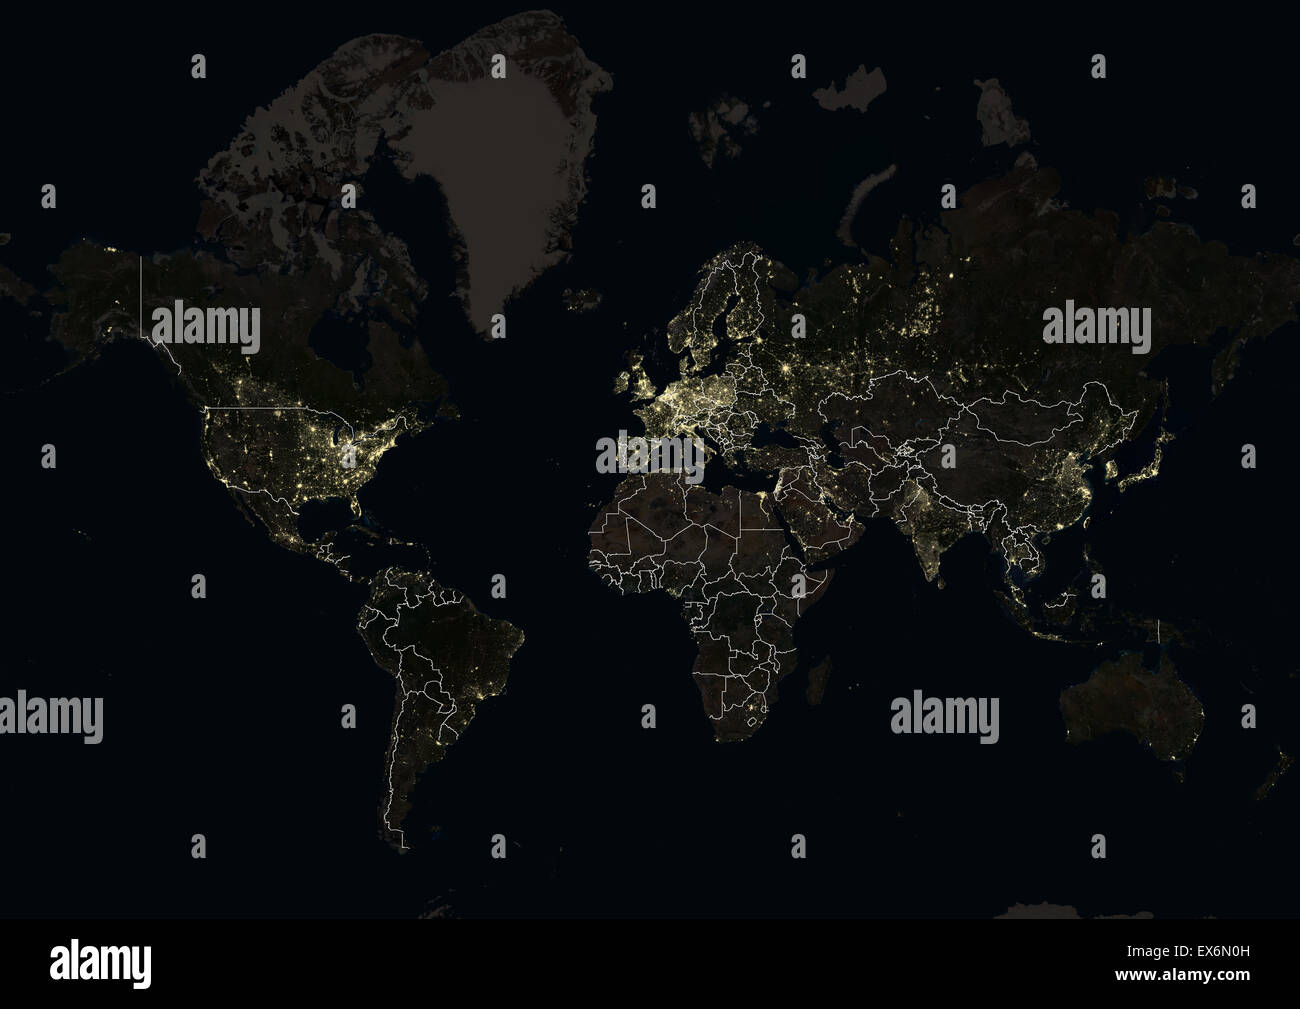 World at night in 2012, showing a world map in Mercator projection. This satellite image with country borders shows urban and Stock Photo